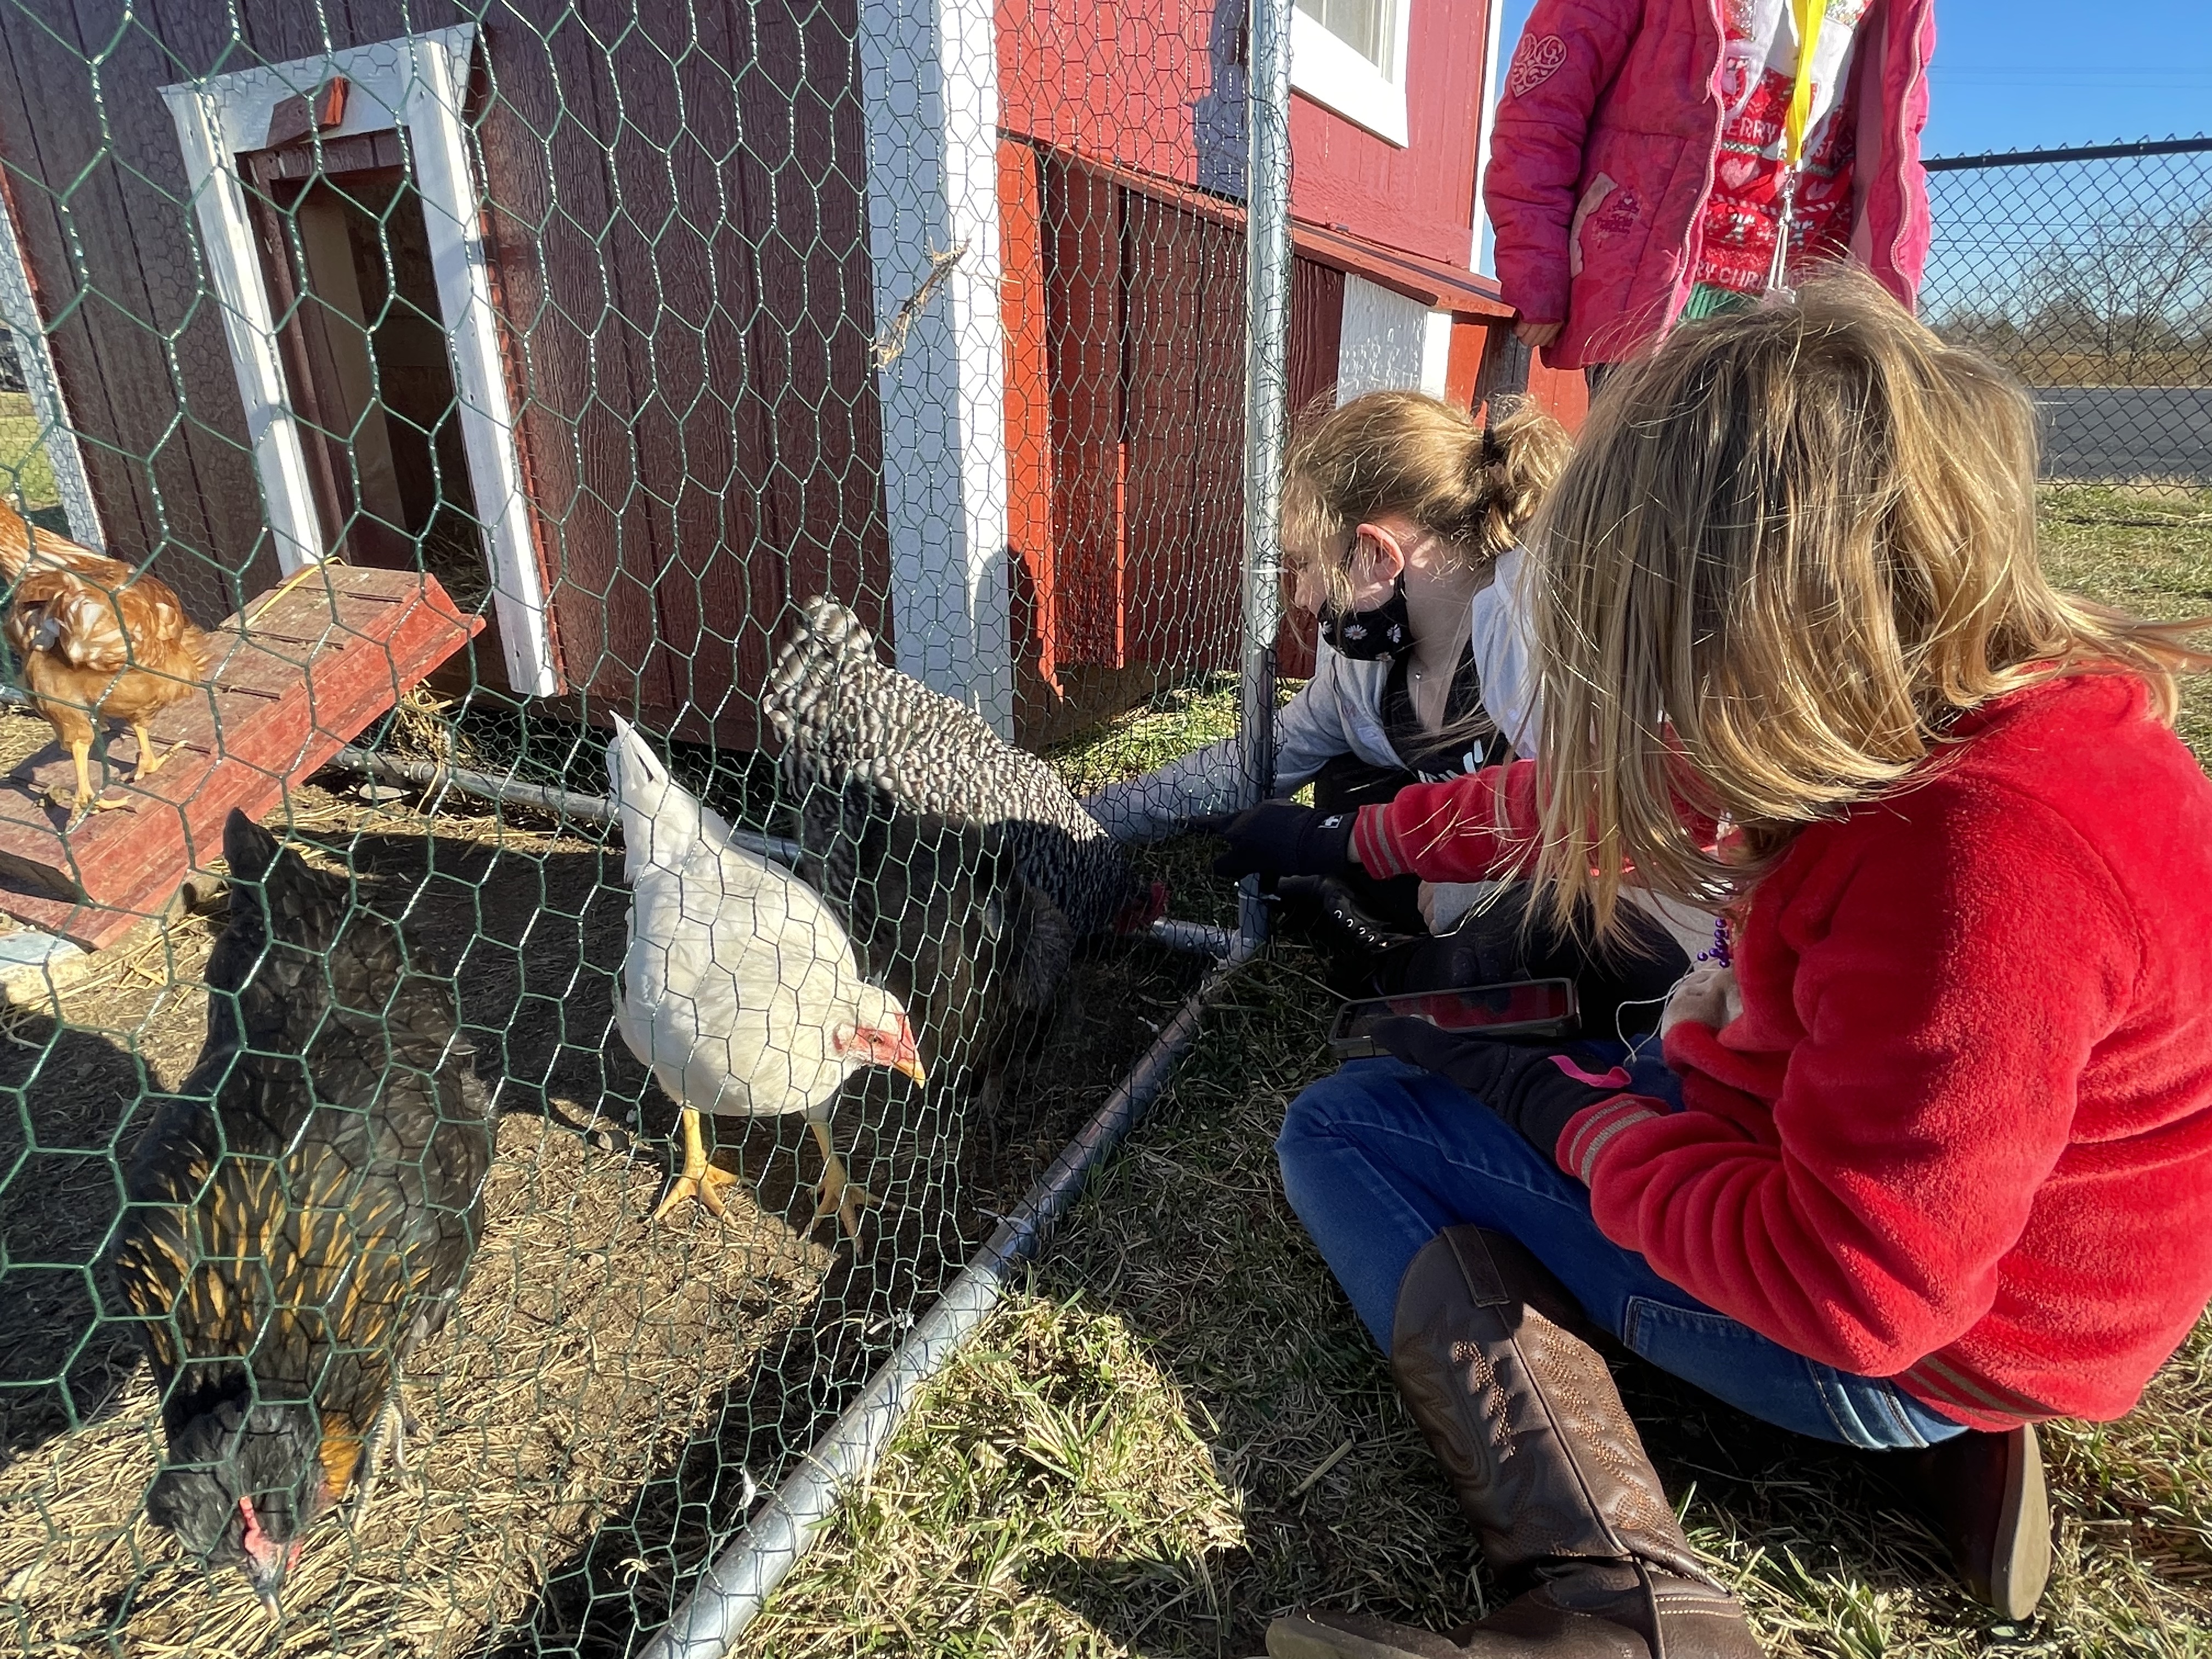 girls playing with chickens through fence